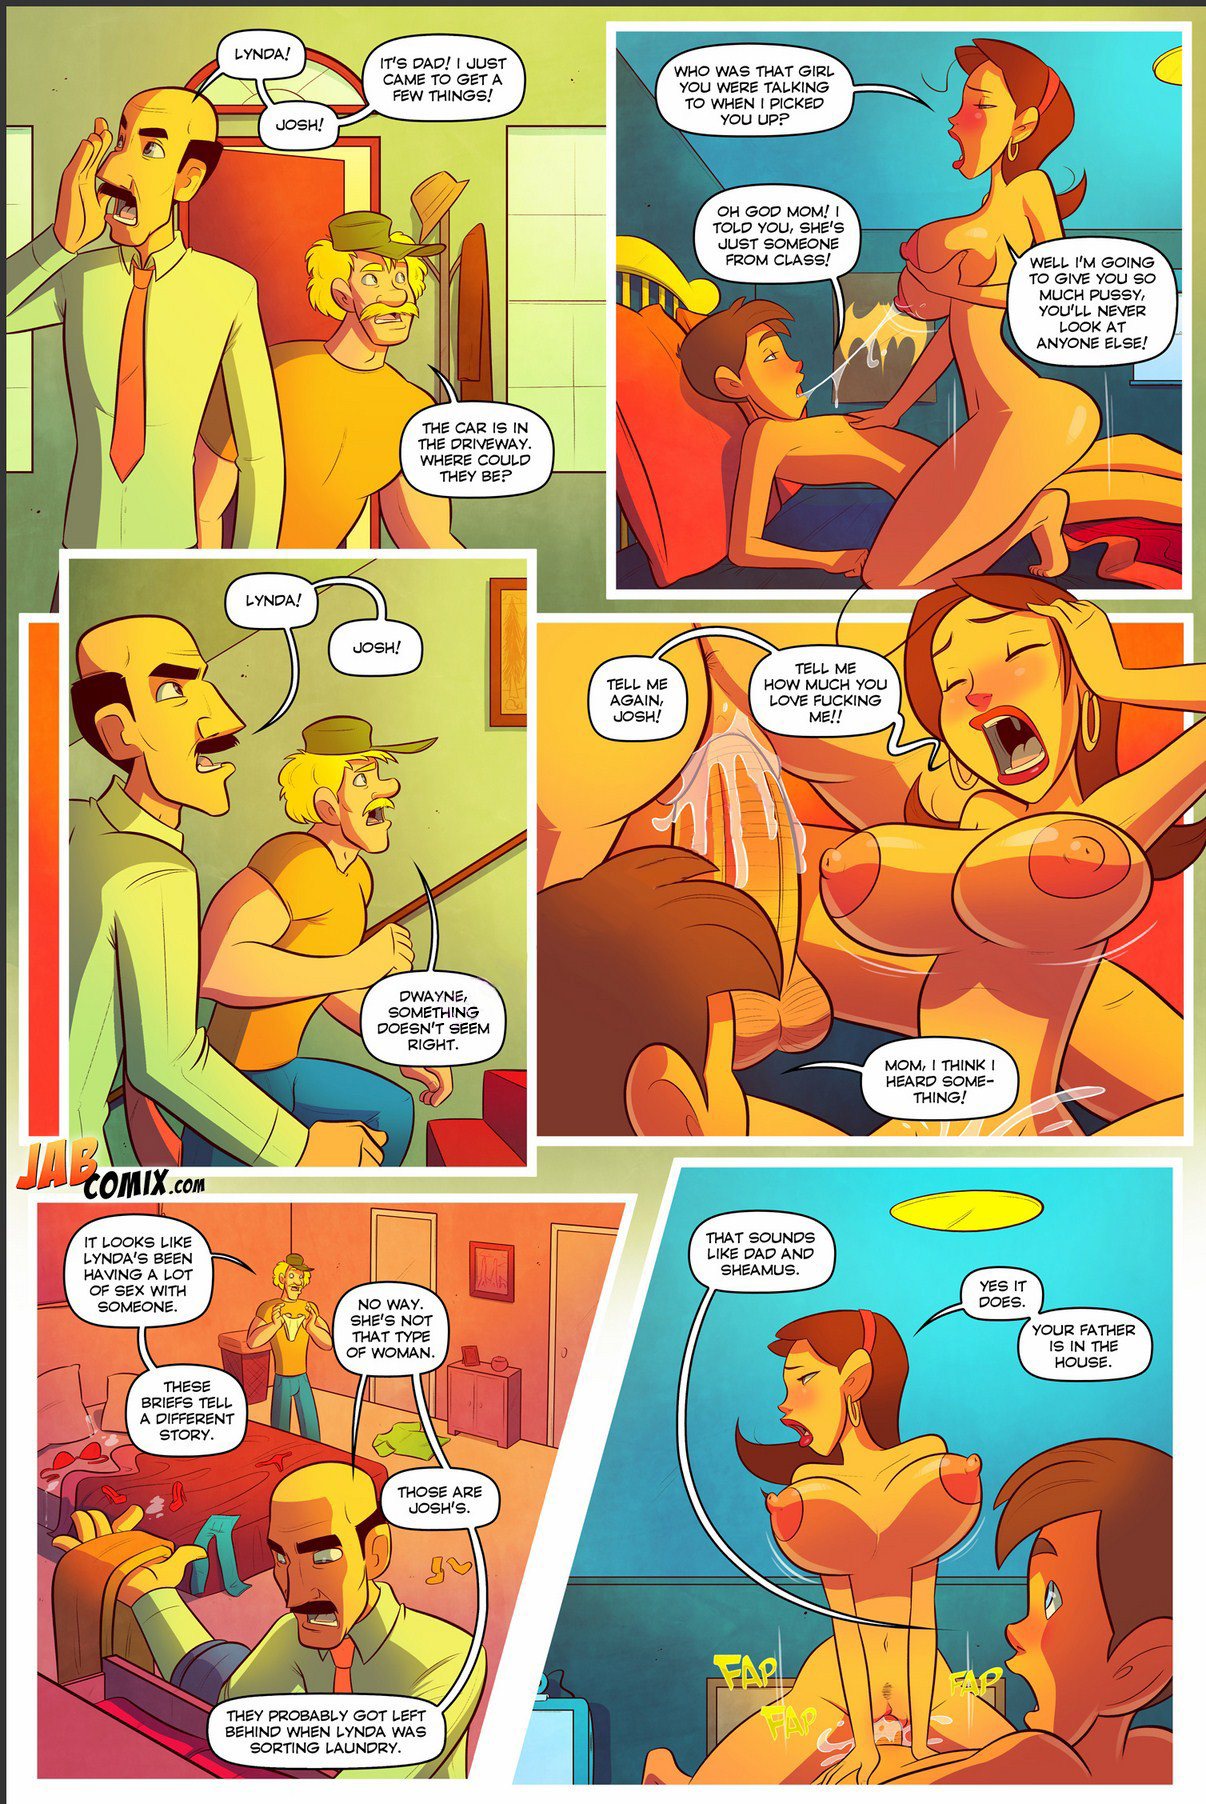 Keeping It Up with the Joneses 1-6 by JabComix